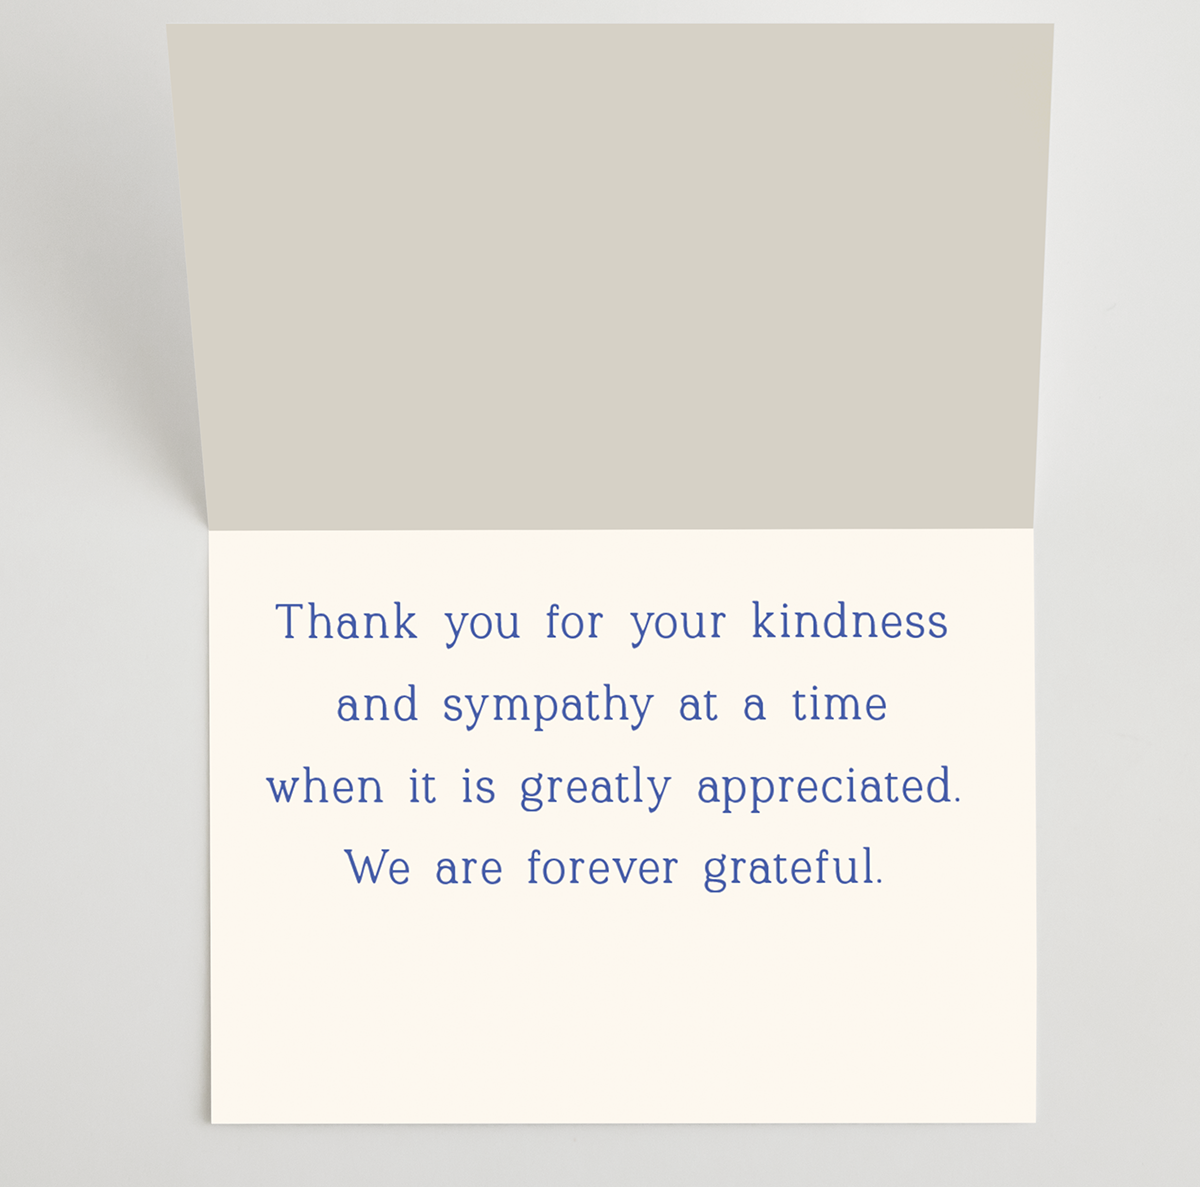 25 Floral Funeral Sympathy Bereavement Thank You Cards With Envelopes 